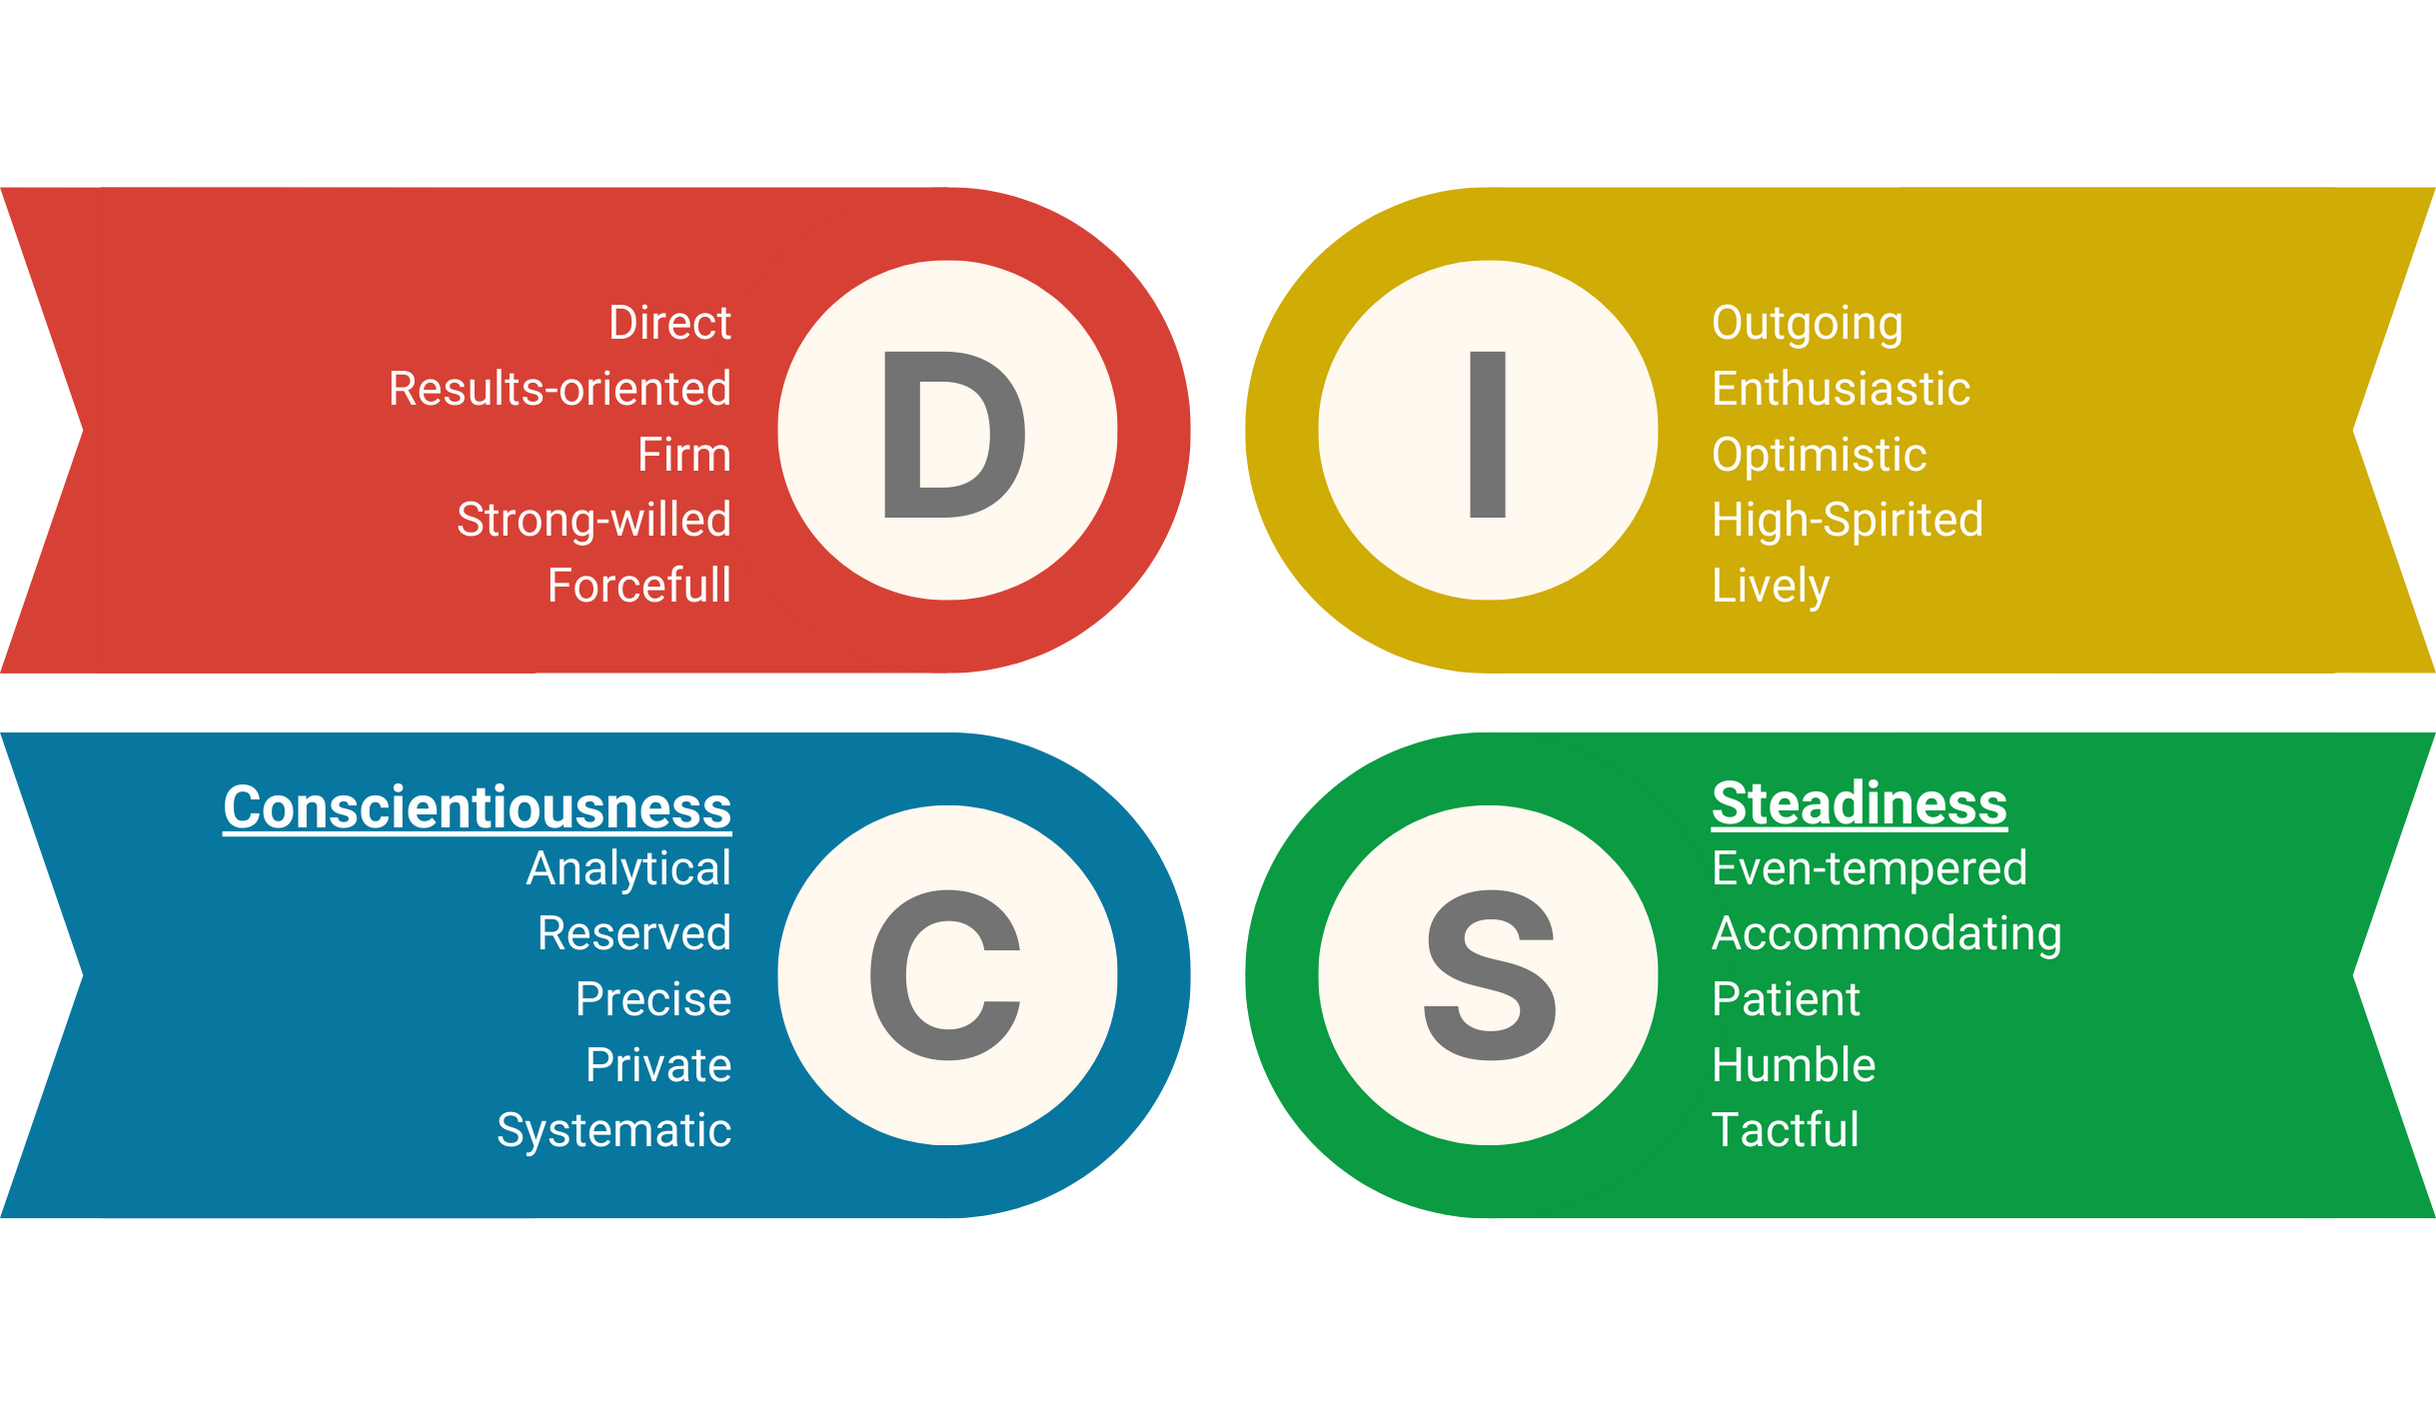 4 different DISC workstyles and their common traits